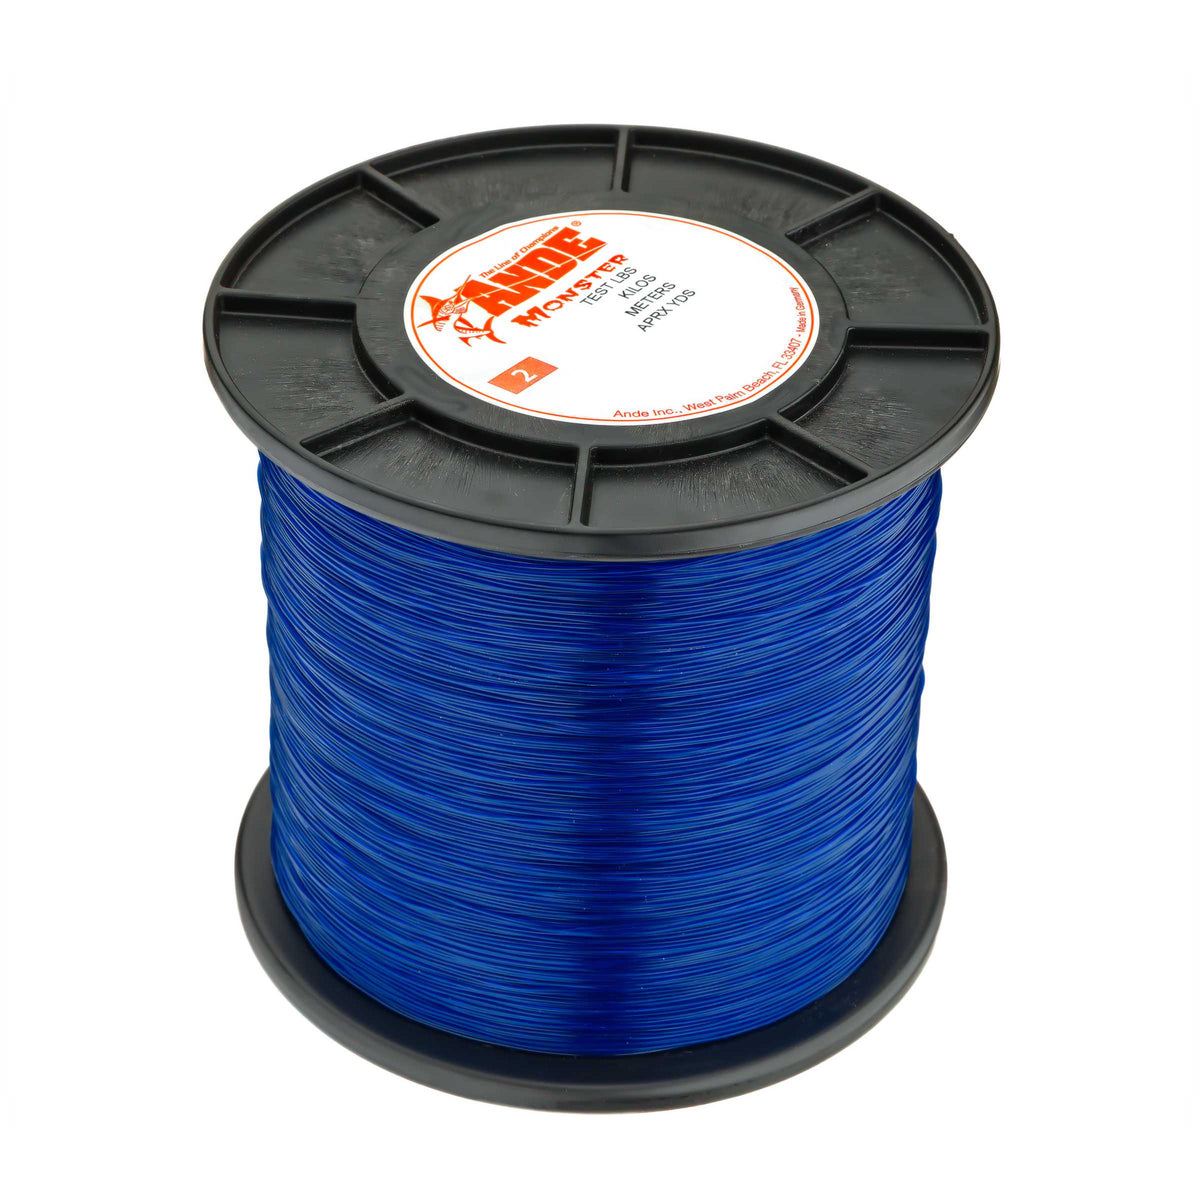  Ande Monster Fishing Lines, 1 lb/ 60 lb, Blue : Monofilament Fishing  Line : Sports & Outdoors